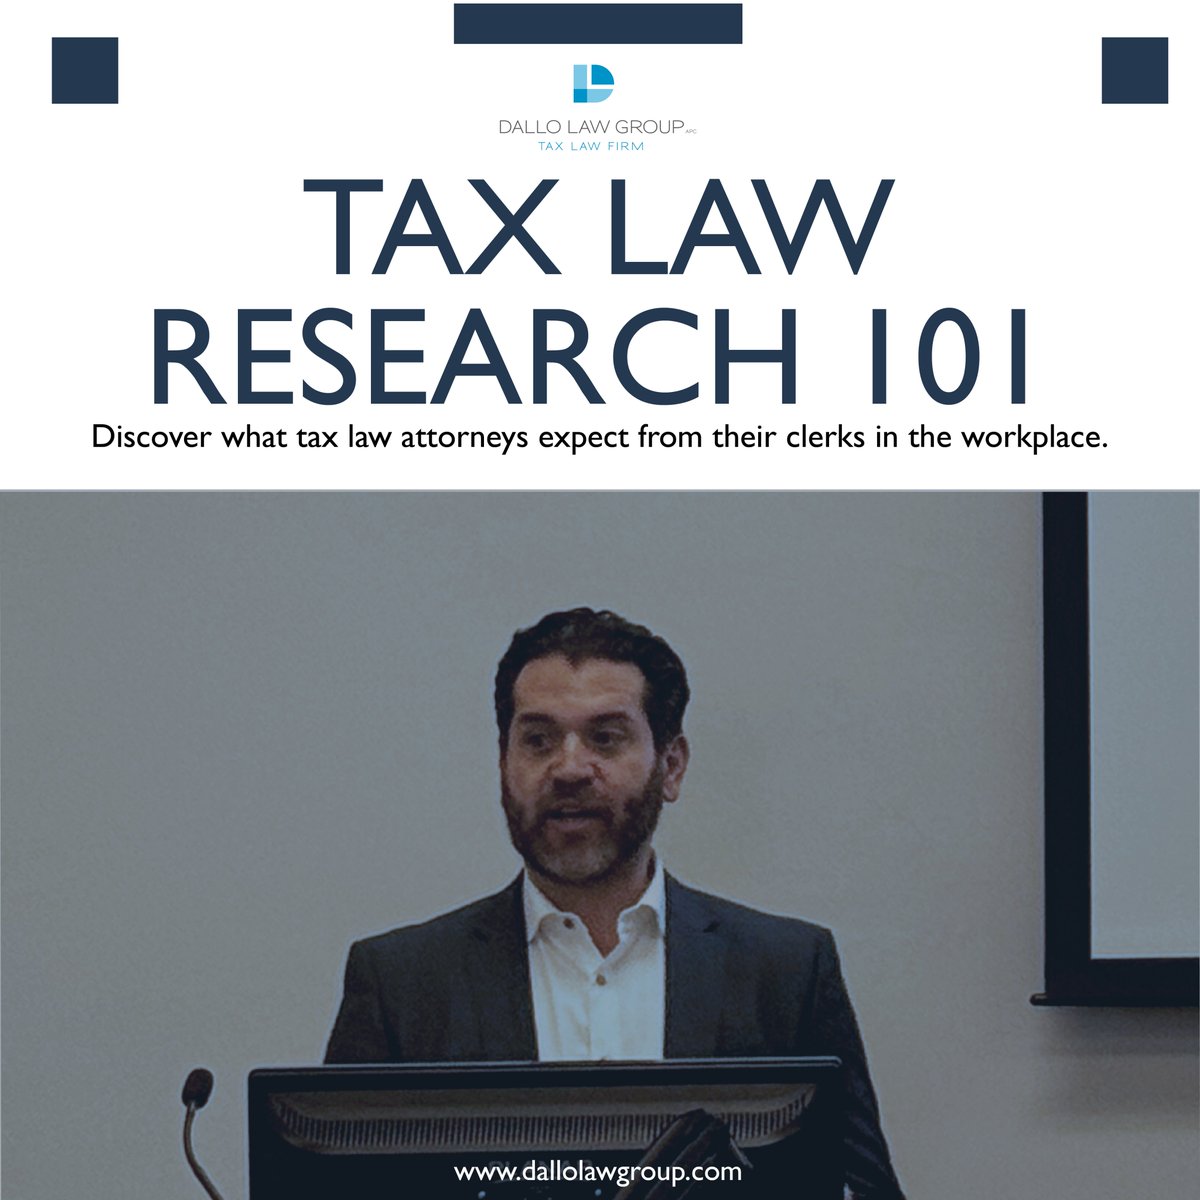 This past Tuesday, February 20th, our very own Principal Attorney, Michael Dallo had the honor of sharing his expertise at USD's Tax Law Research 101 session! 
#TaxLaw #LegalResearch #Internships #DalloLawGroup #SanDiego #PeaceofMind #TaxAttorneys #LawClerks #SanDiegoTaxAttorneys